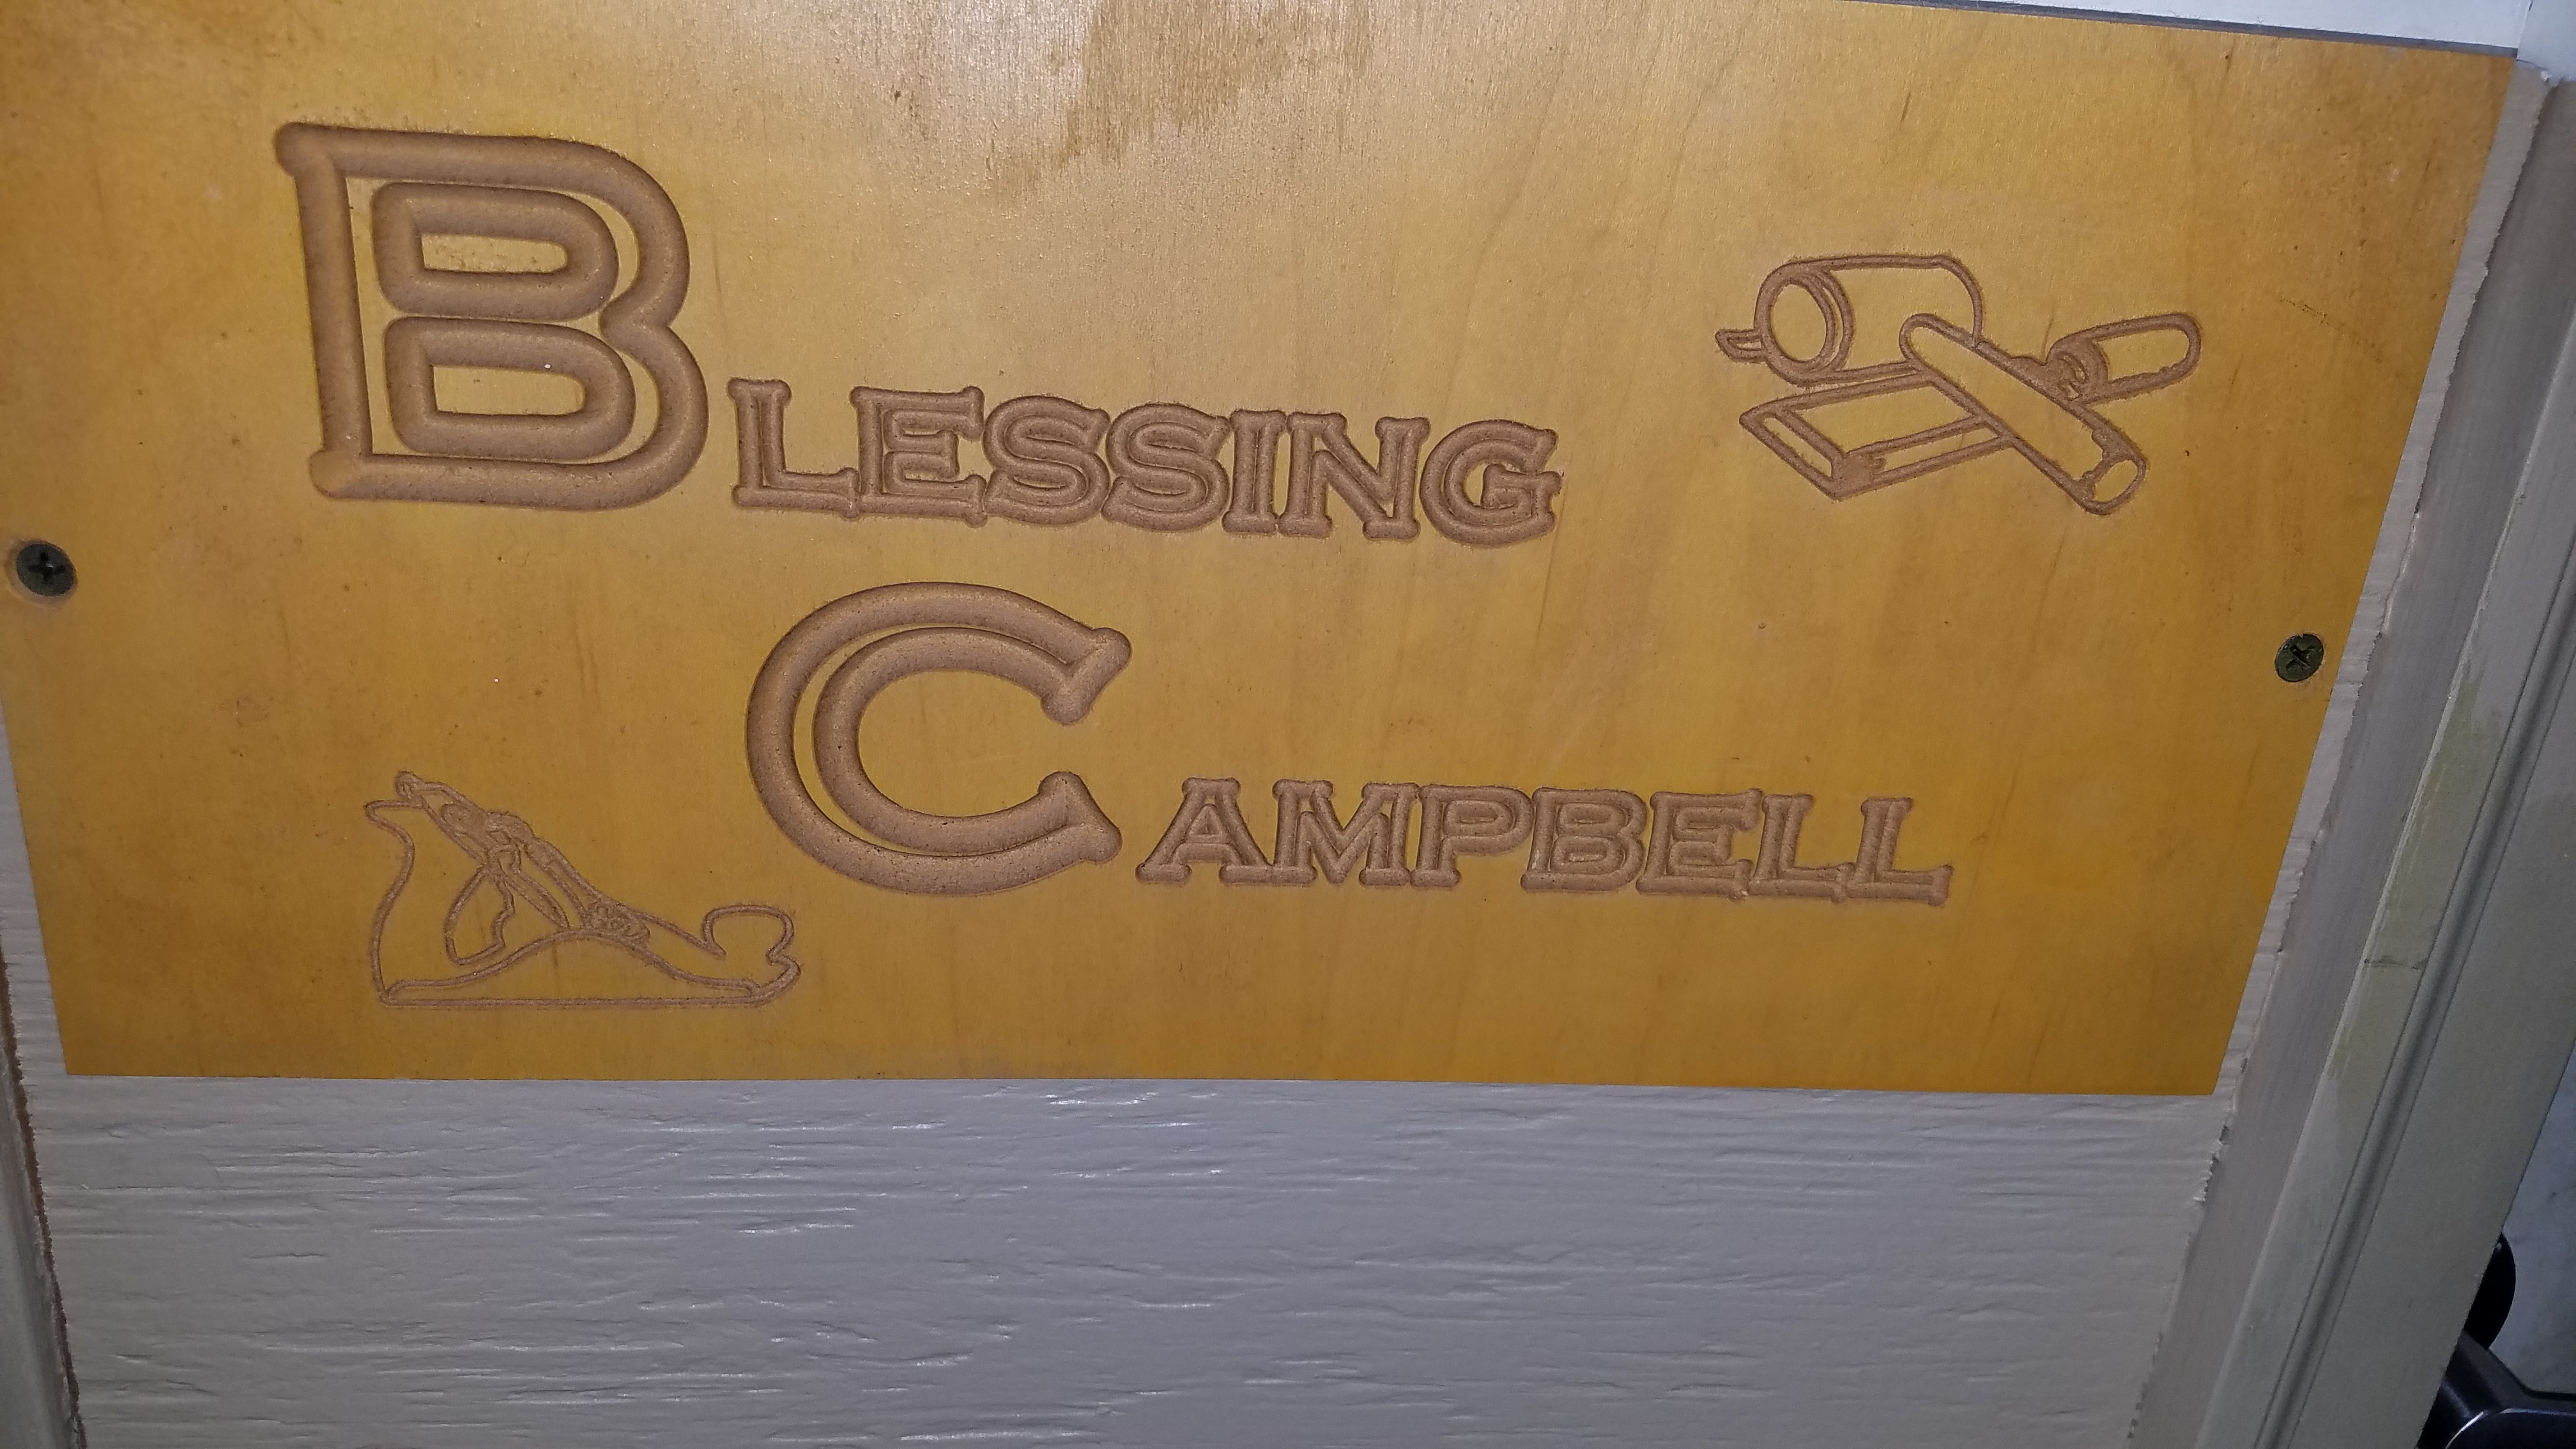 Blessing Campbell Logo